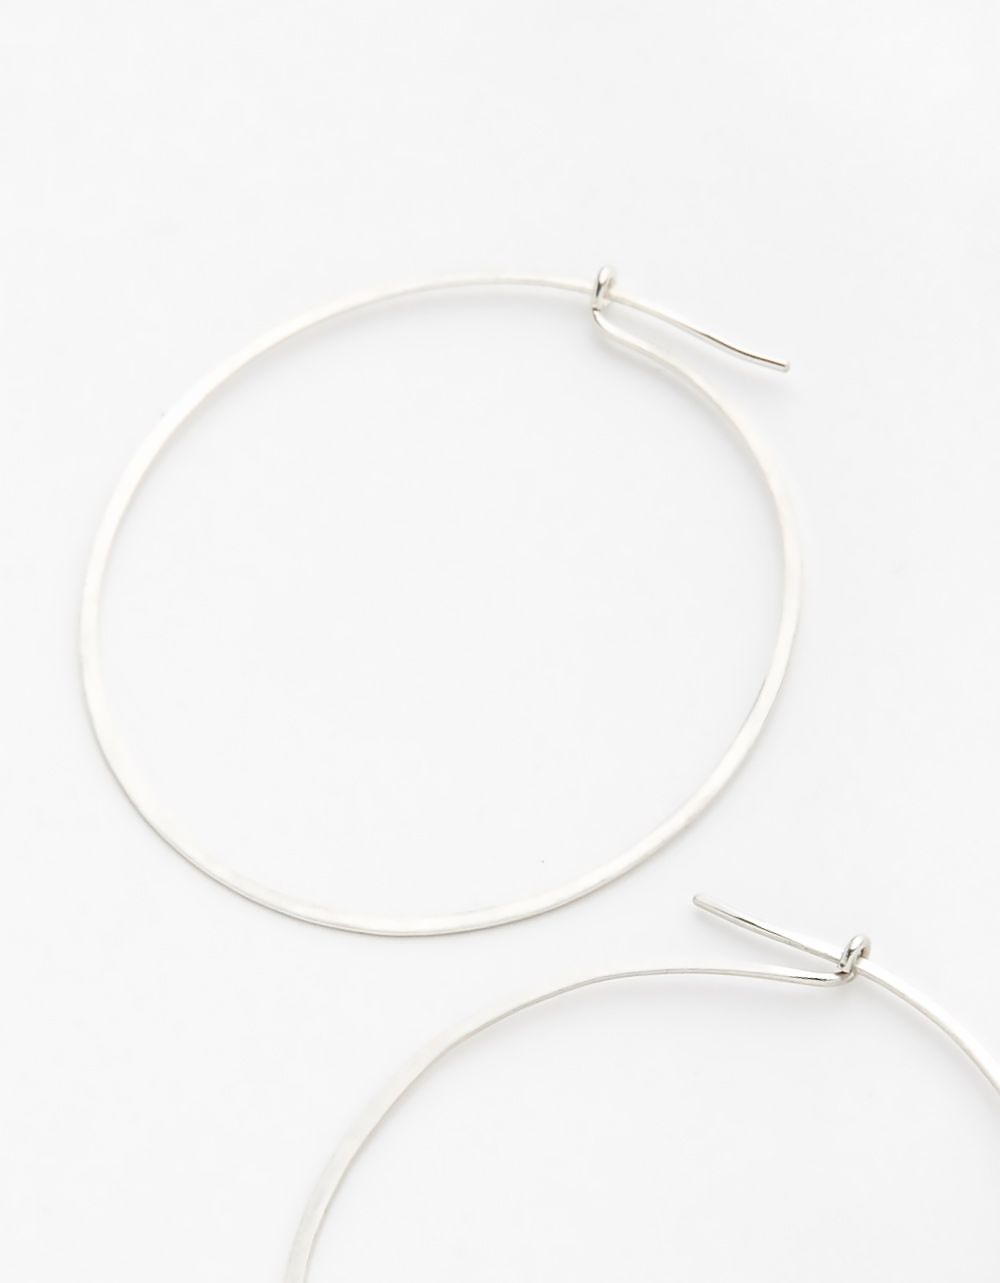 Large Round Hoops in Silver by Jenny Sheriff_1